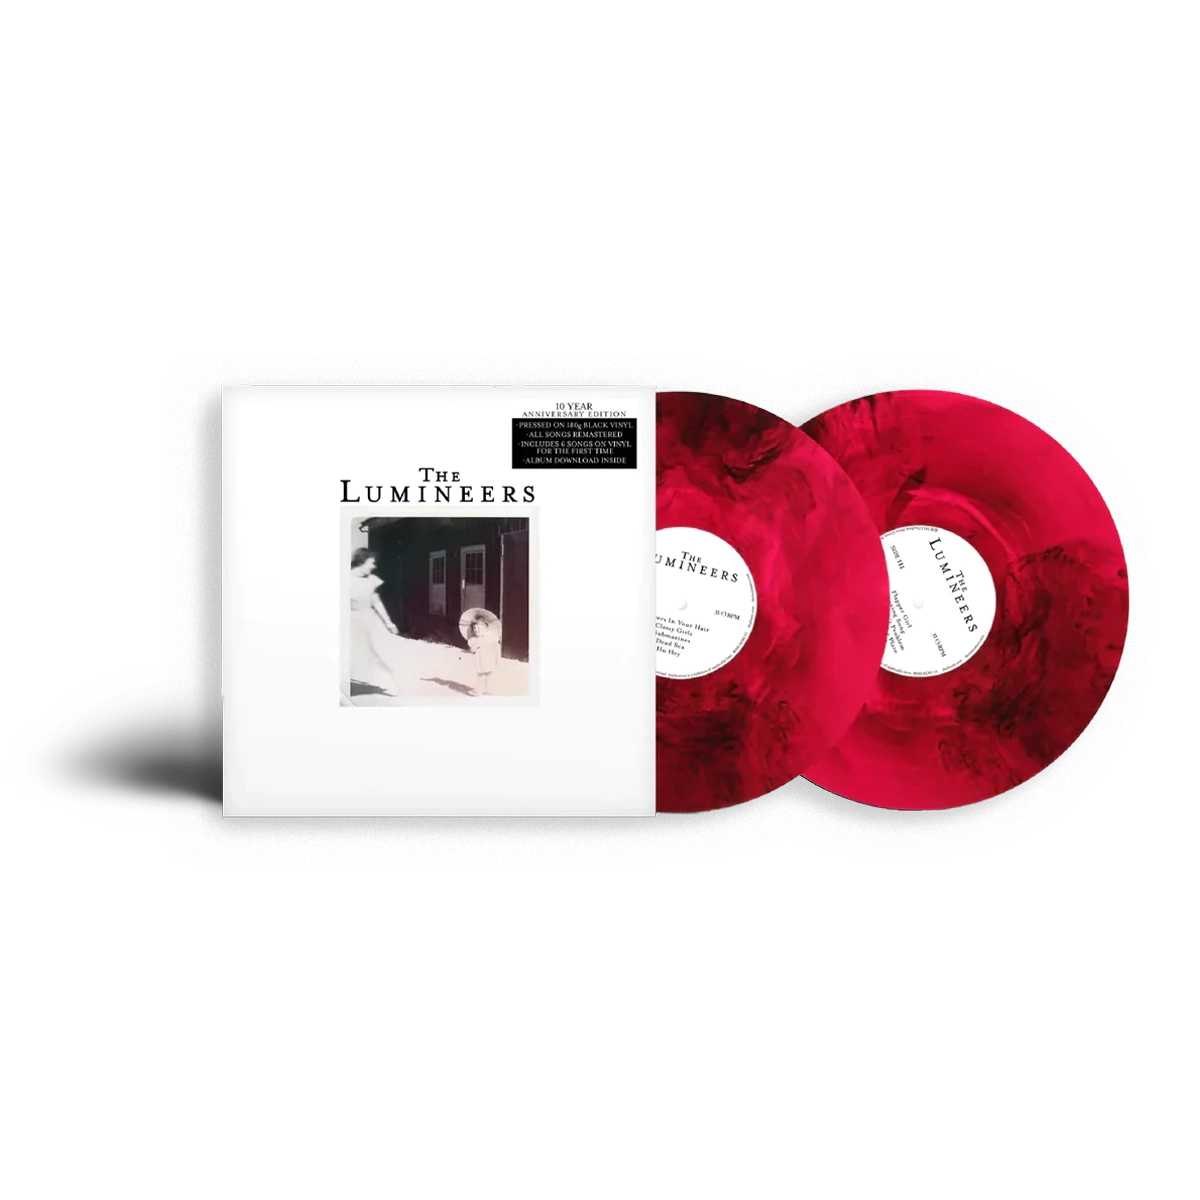 The Lumineers - The Lumineers (10th Anniversary Edition): Singed Red Marble Vinyl 2LP